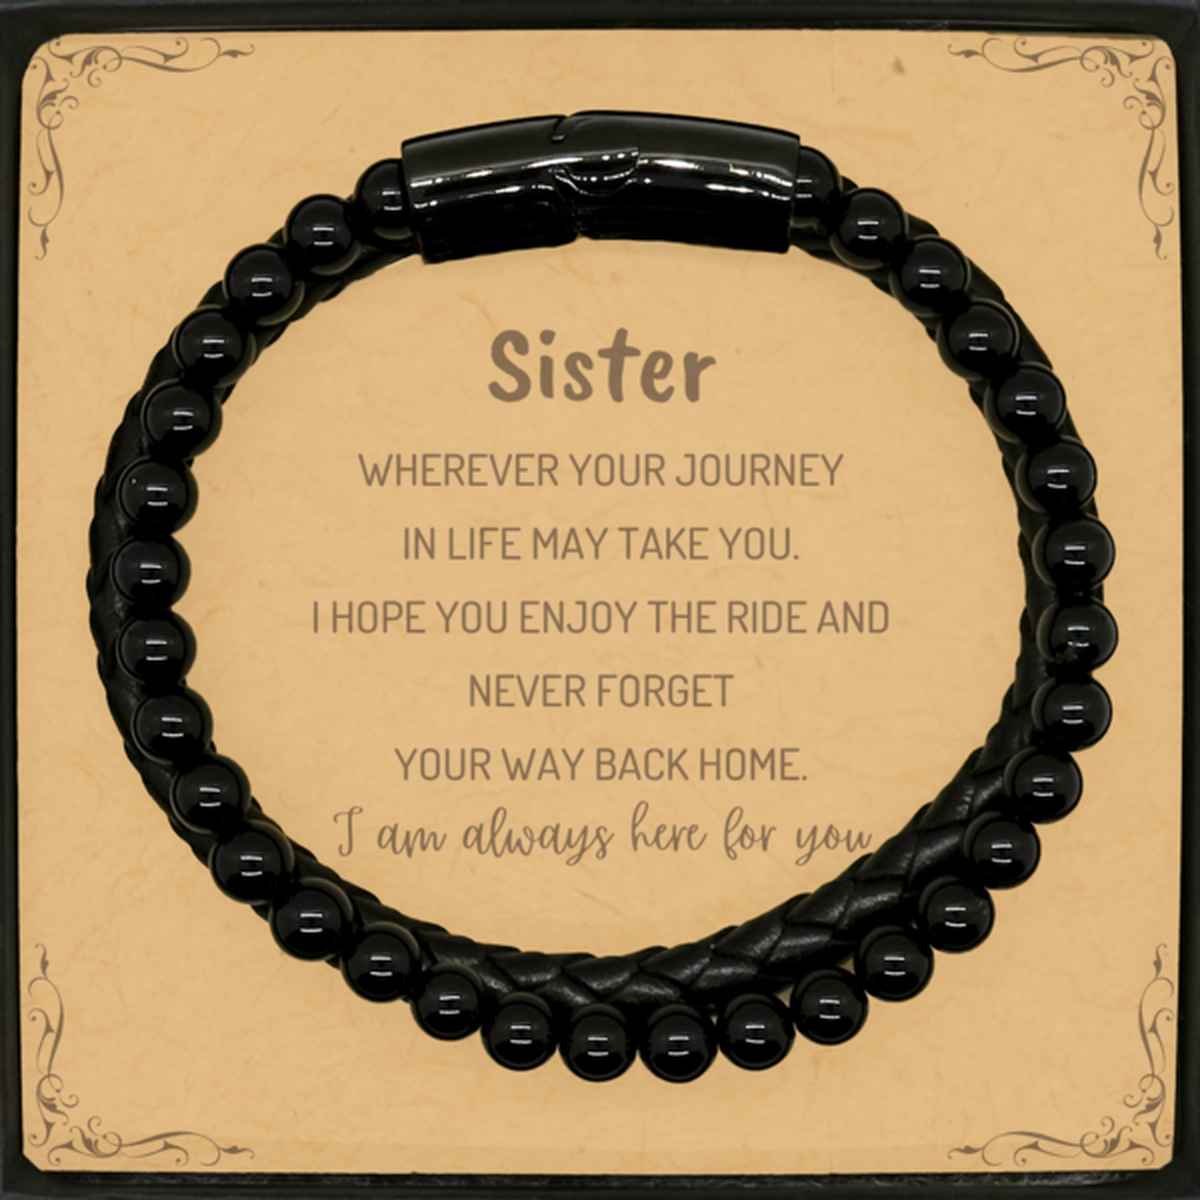 Sister wherever your journey in life may take you, I am always here for you Sister Stone Leather Bracelets, Awesome Christmas Gifts For Sister Message Card, Sister Birthday Gifts for Men Women Family Loved One